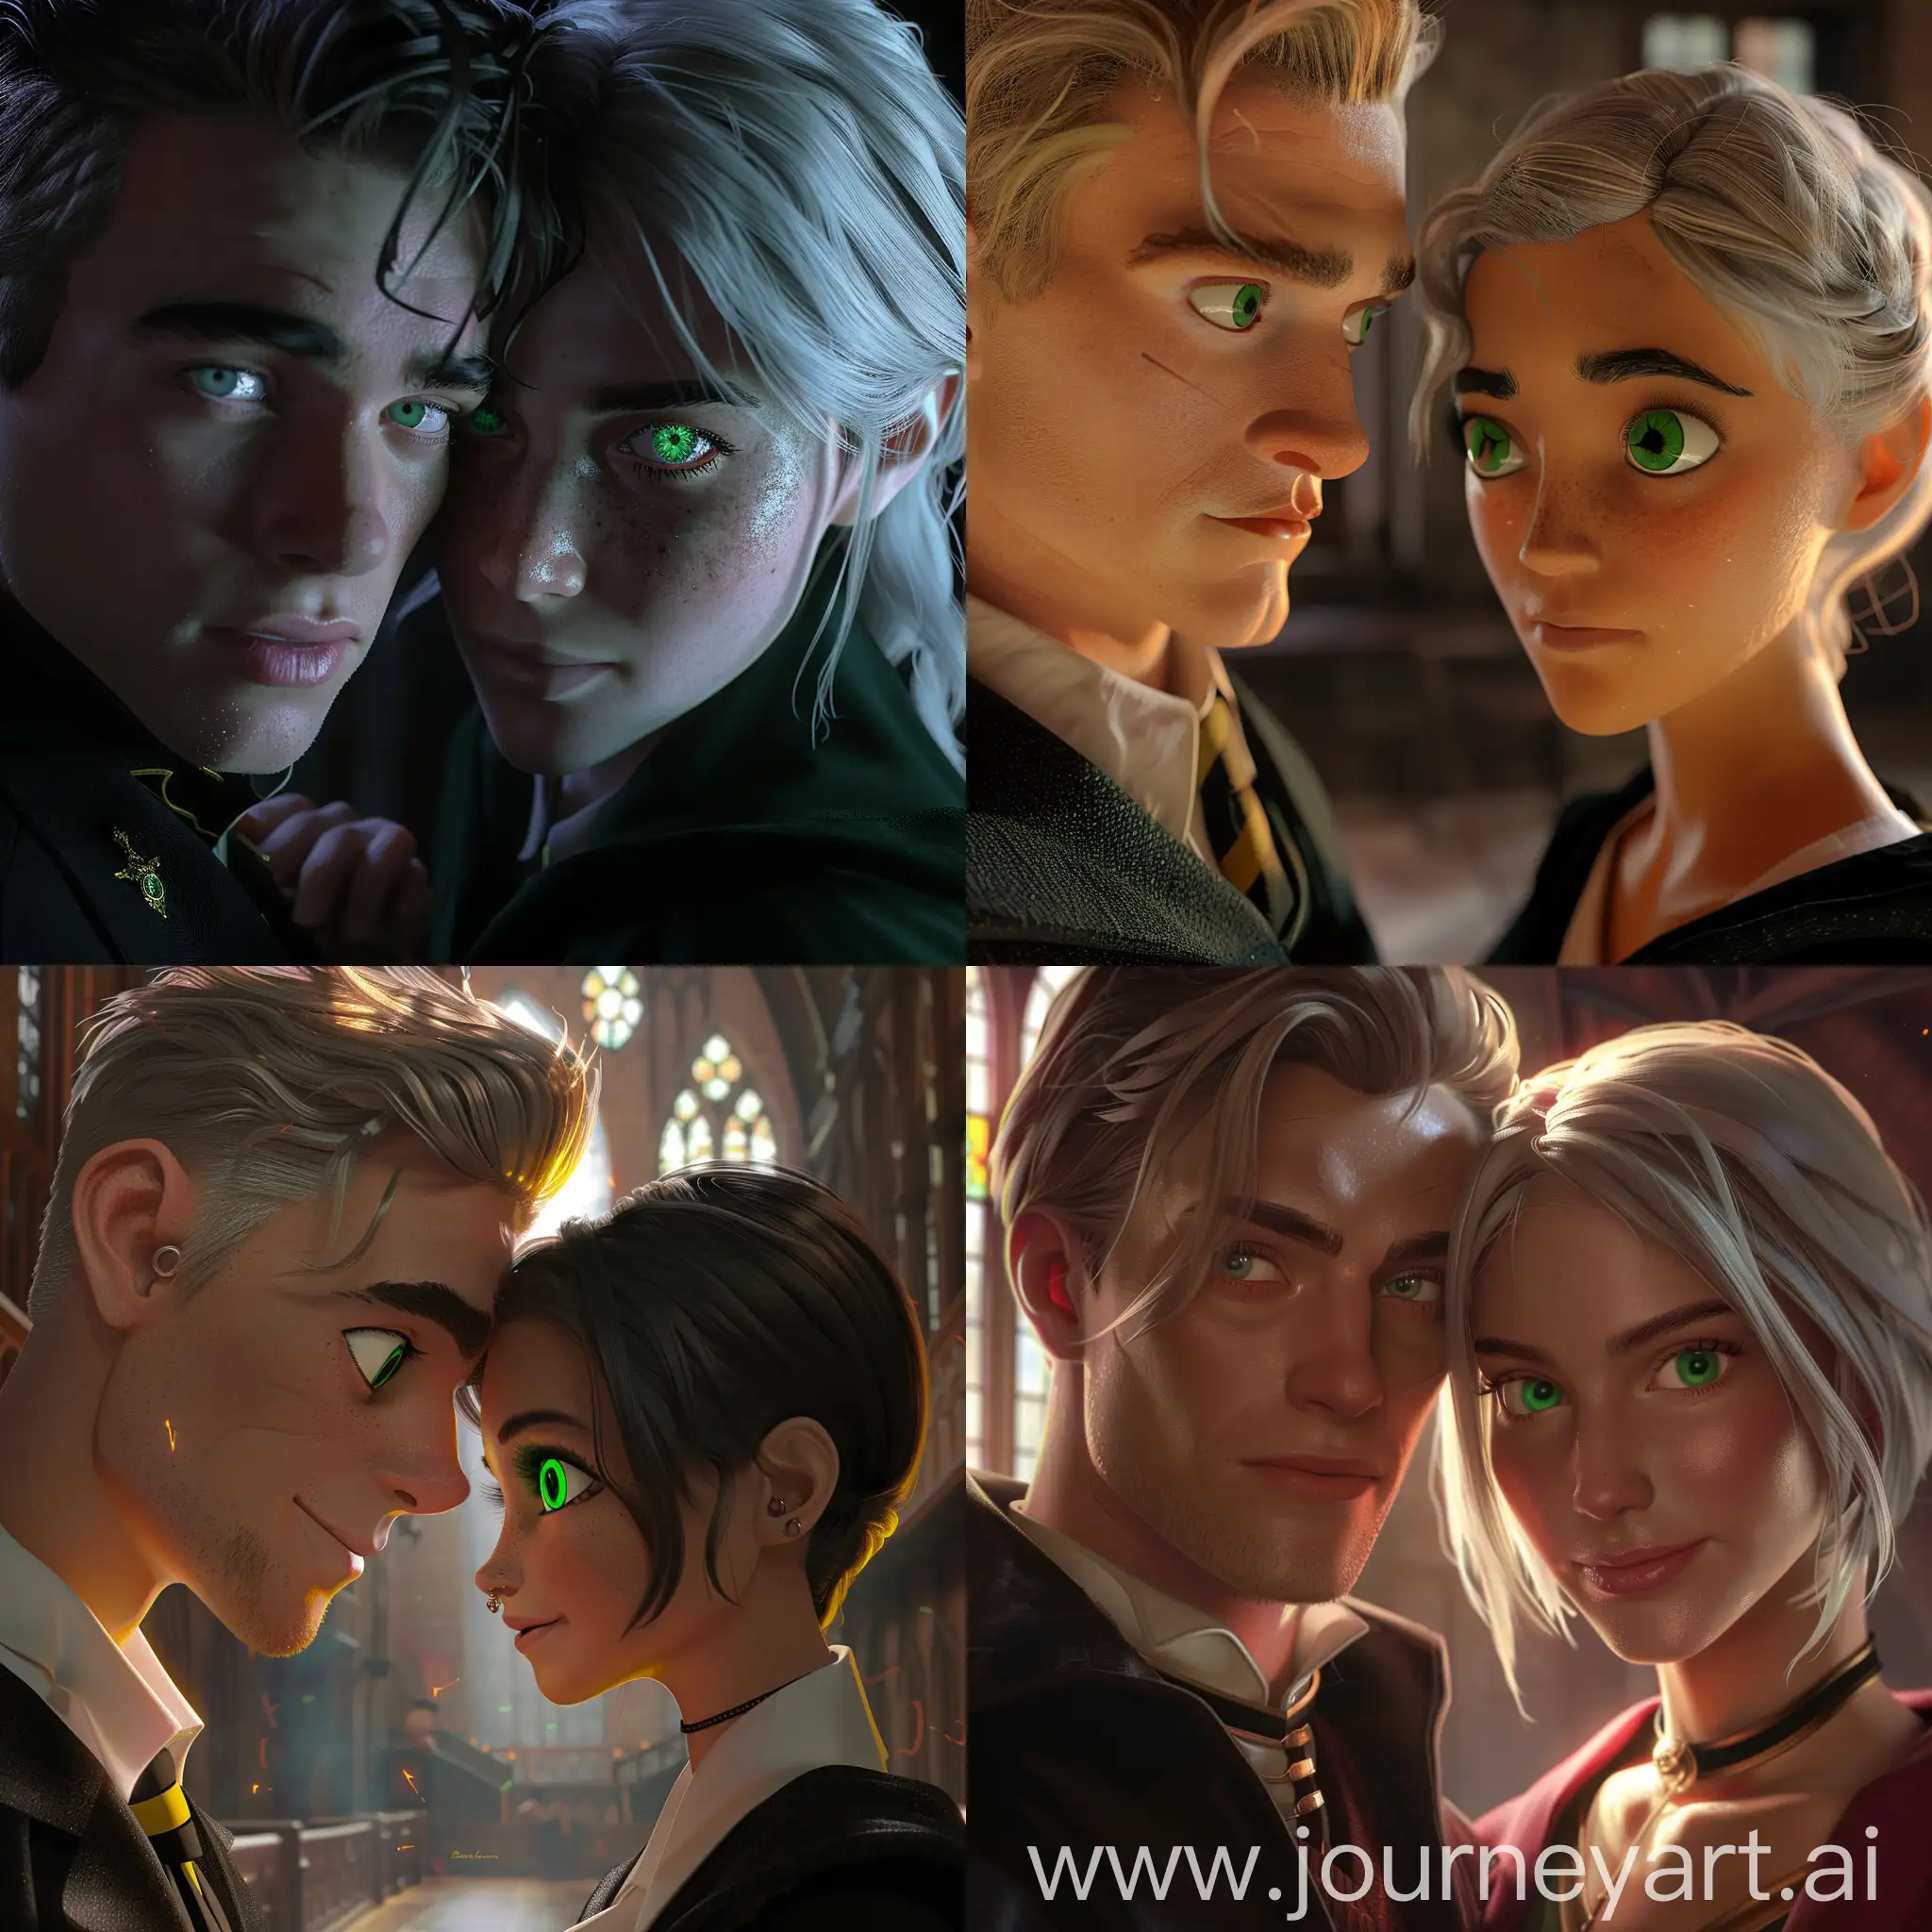 Draco-Malfoy-and-Enchanting-GreenEyed-Companion-in-Magical-Encounter